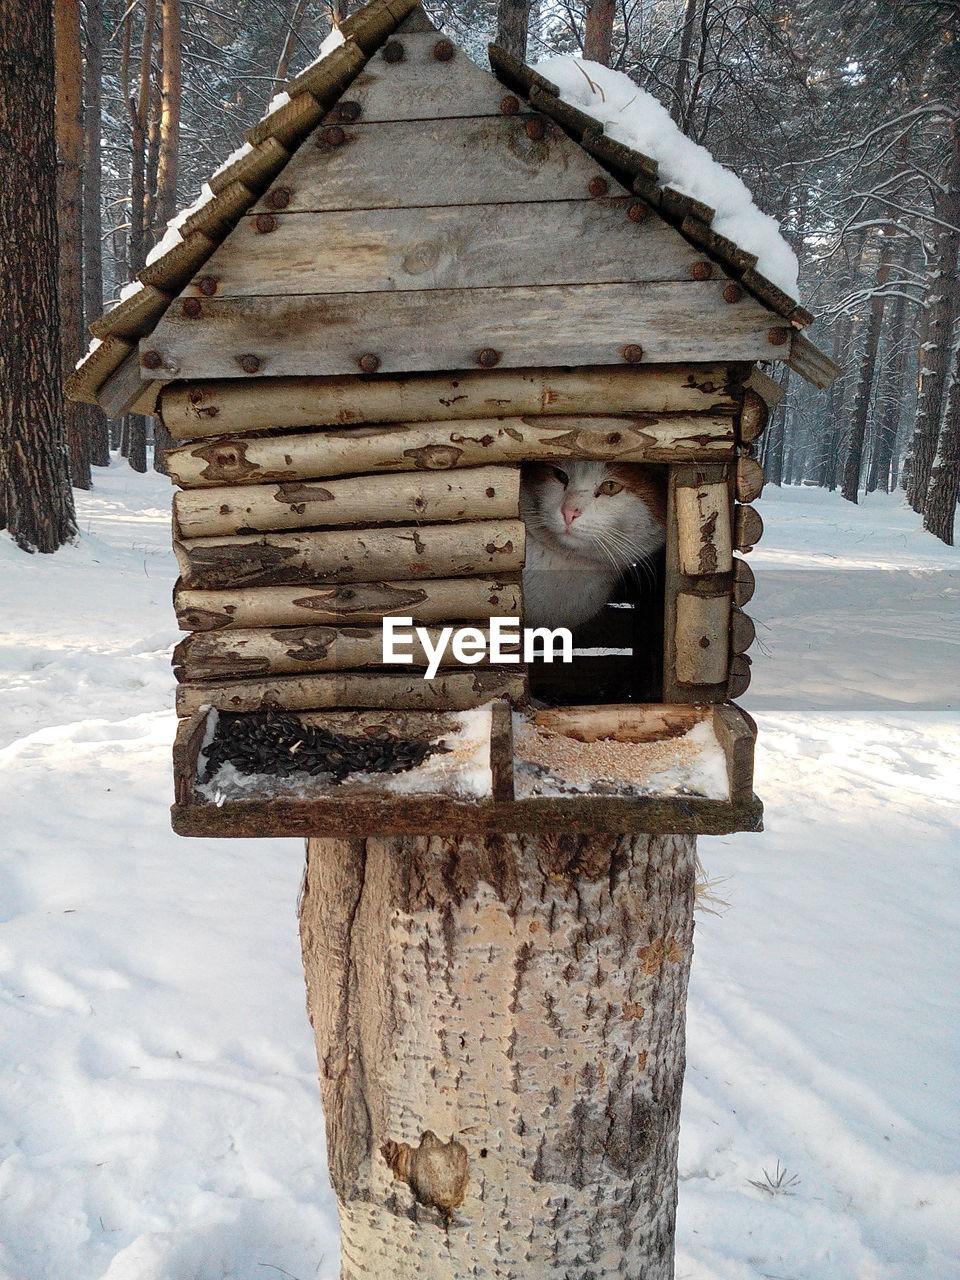 Portrait of cat in birdhouse on snowcapped field during winter